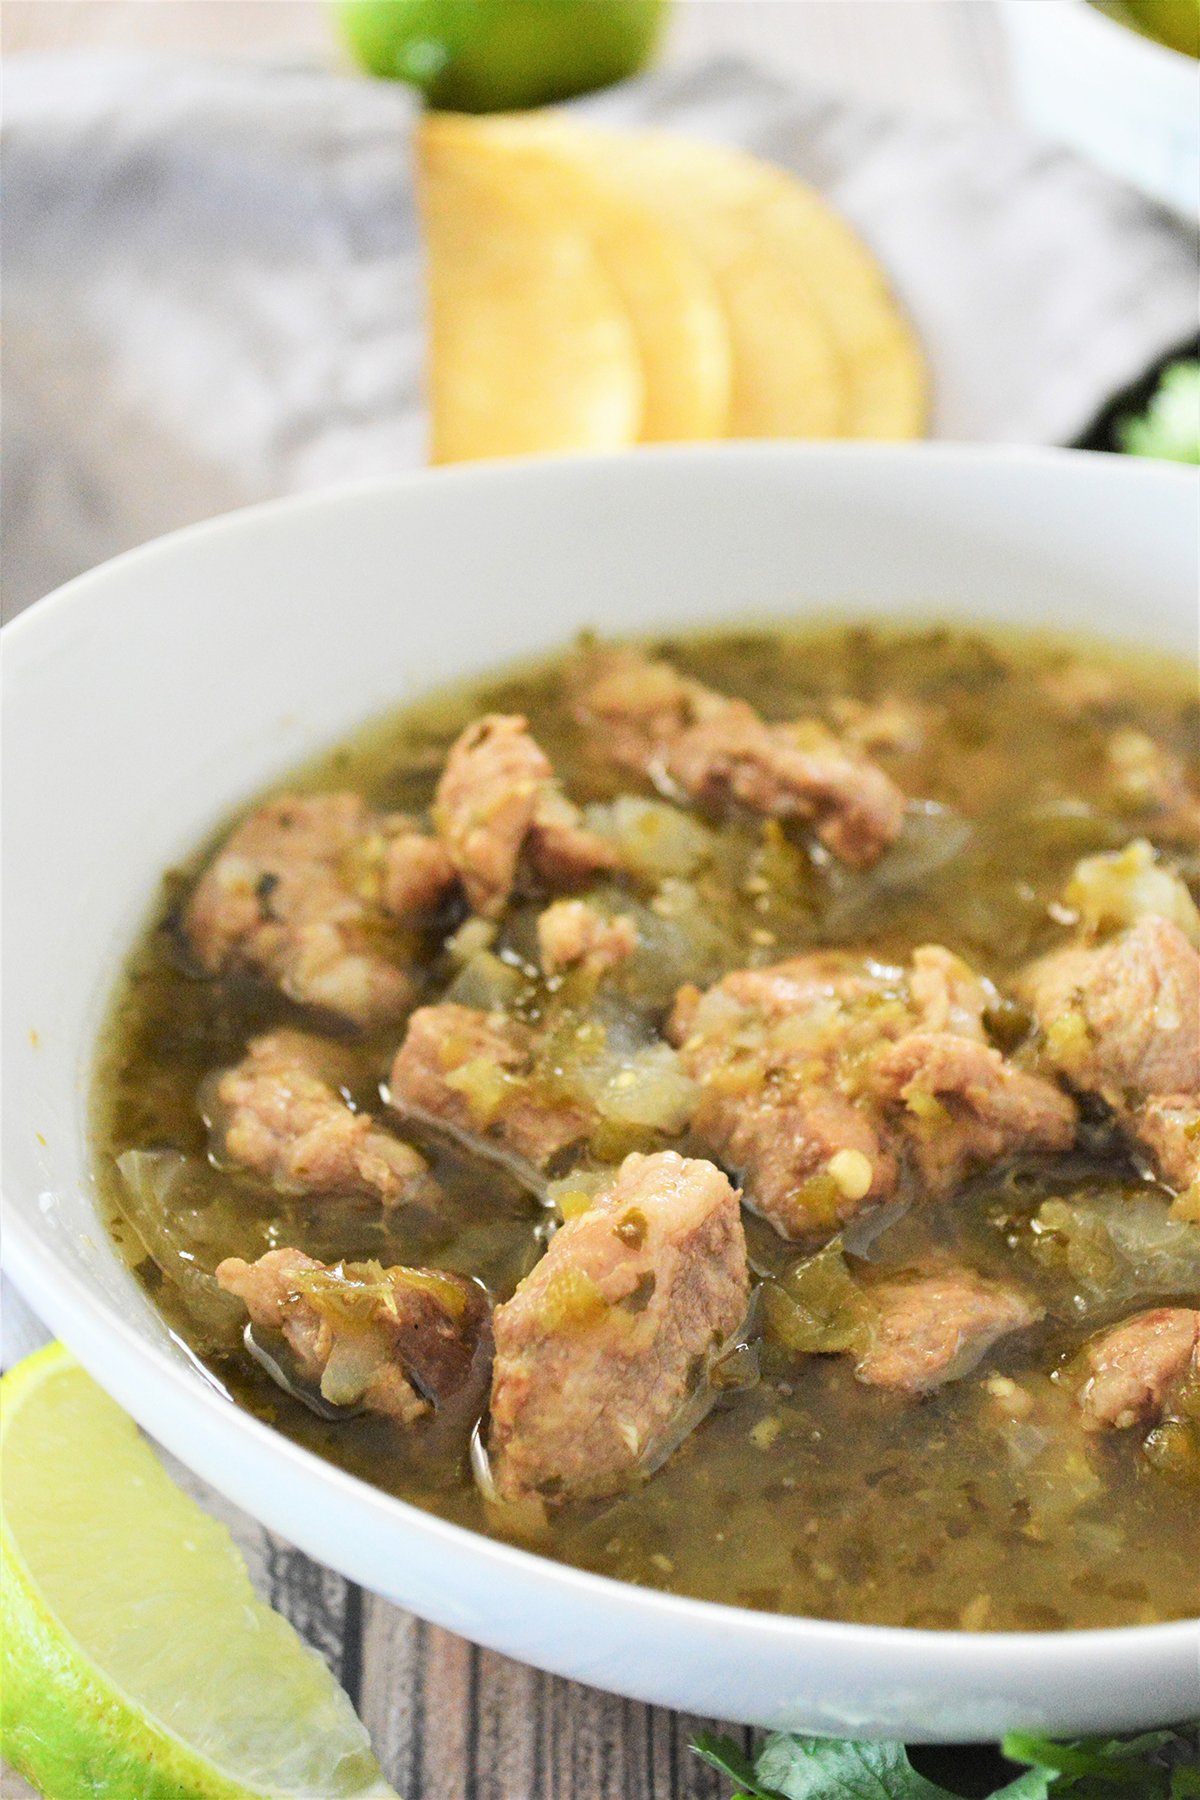 chili verde with pork in a white bowl with corn tortillas on the side